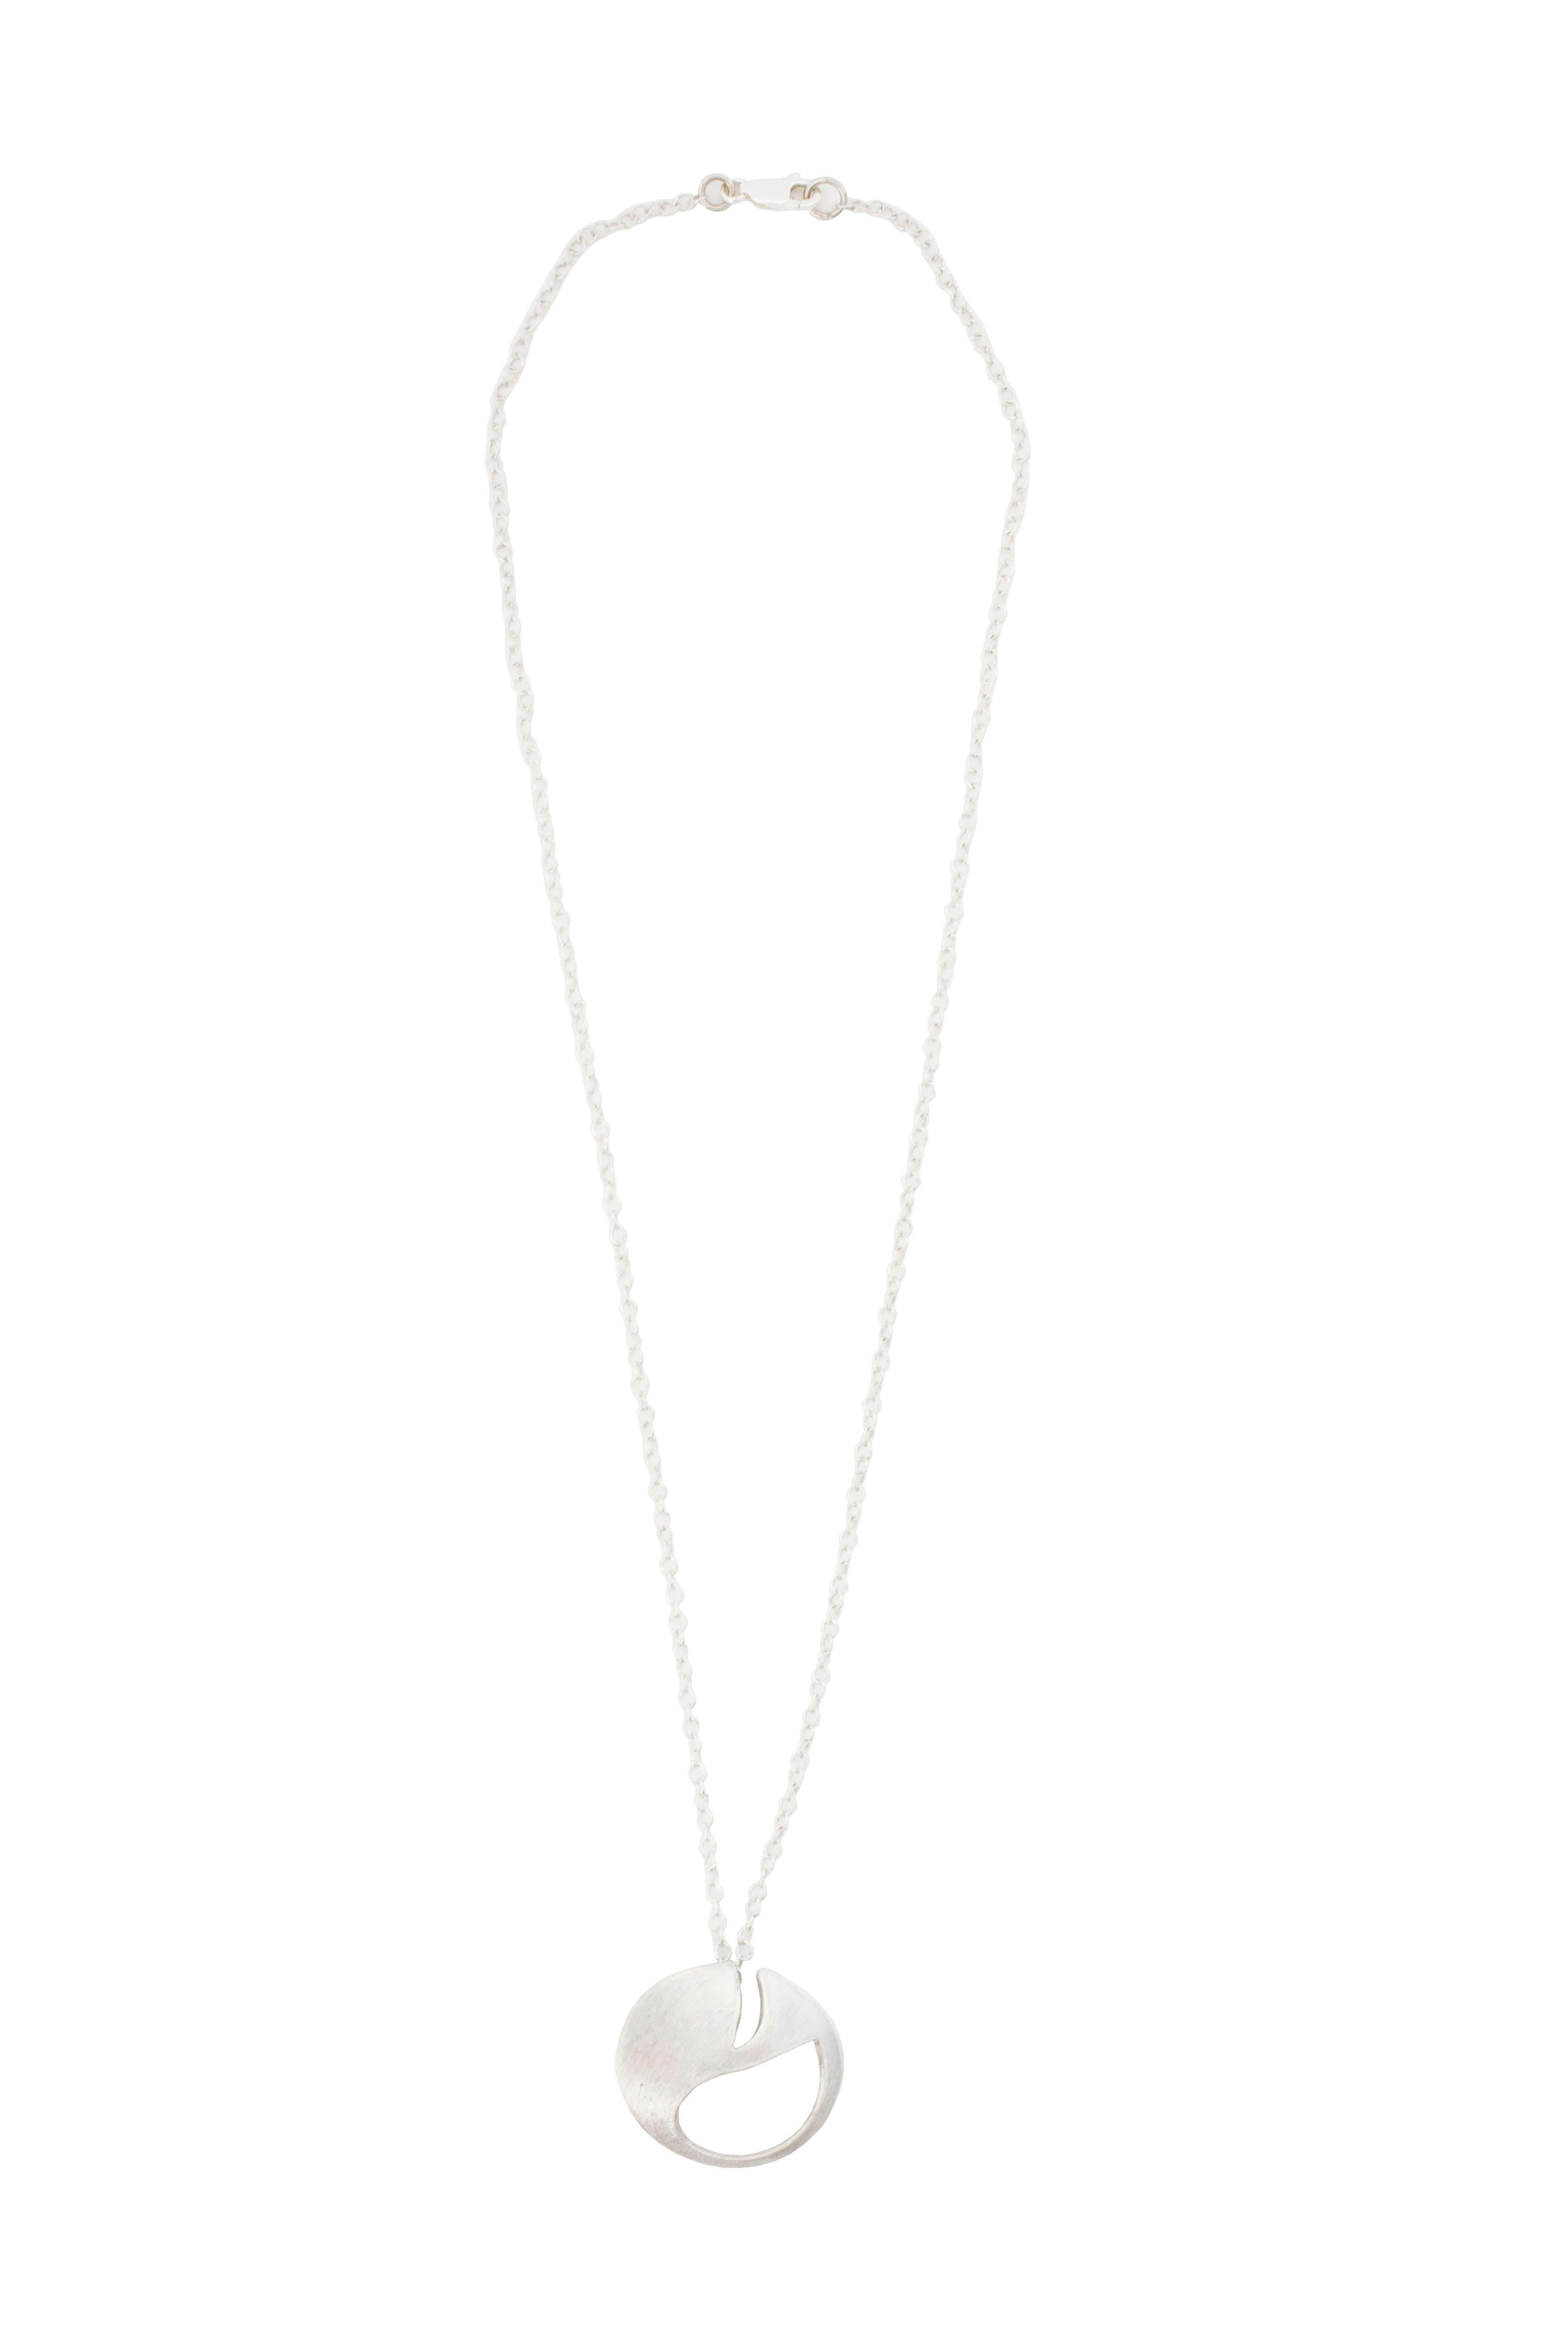 Sterling silver geometric, minimal necklace from our Post Punk collection.

Diameter 3cm
Chain length 48cm

The shape comes from a deformed interpretation of a safety pin head.

